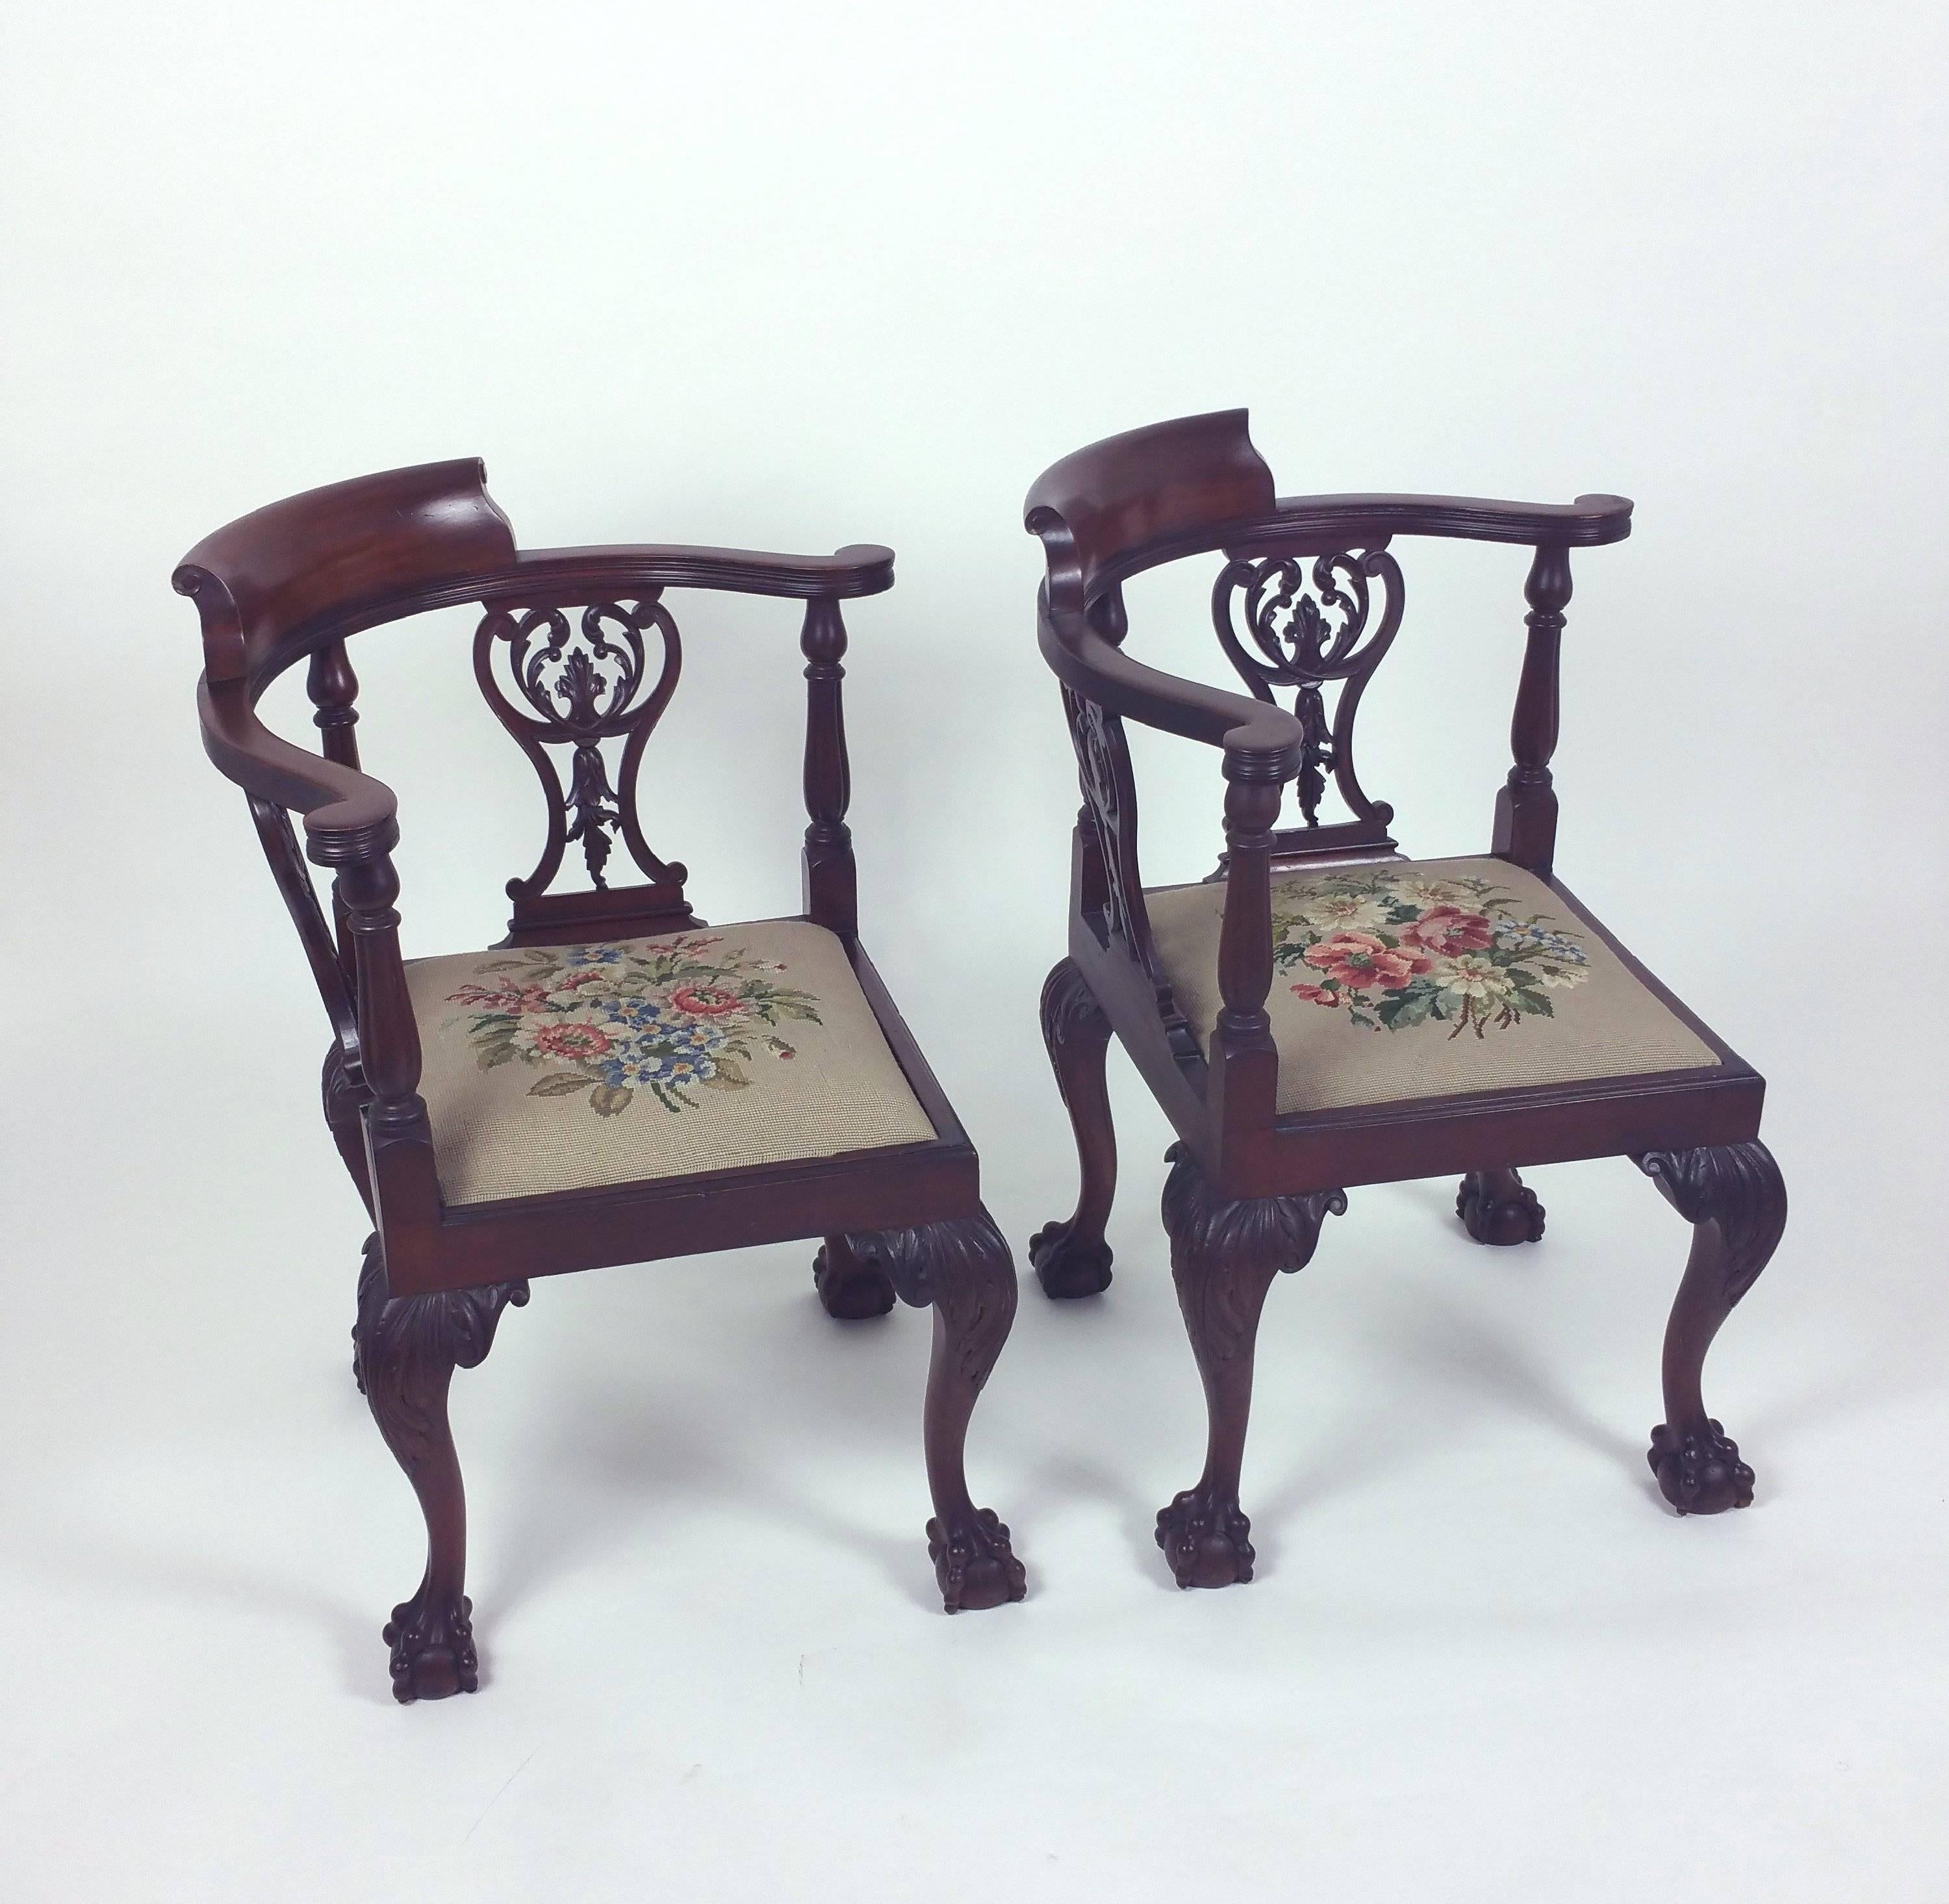 English Pair of Late 19th Century Chippendale Design Carved Mahogany Corner Chairs